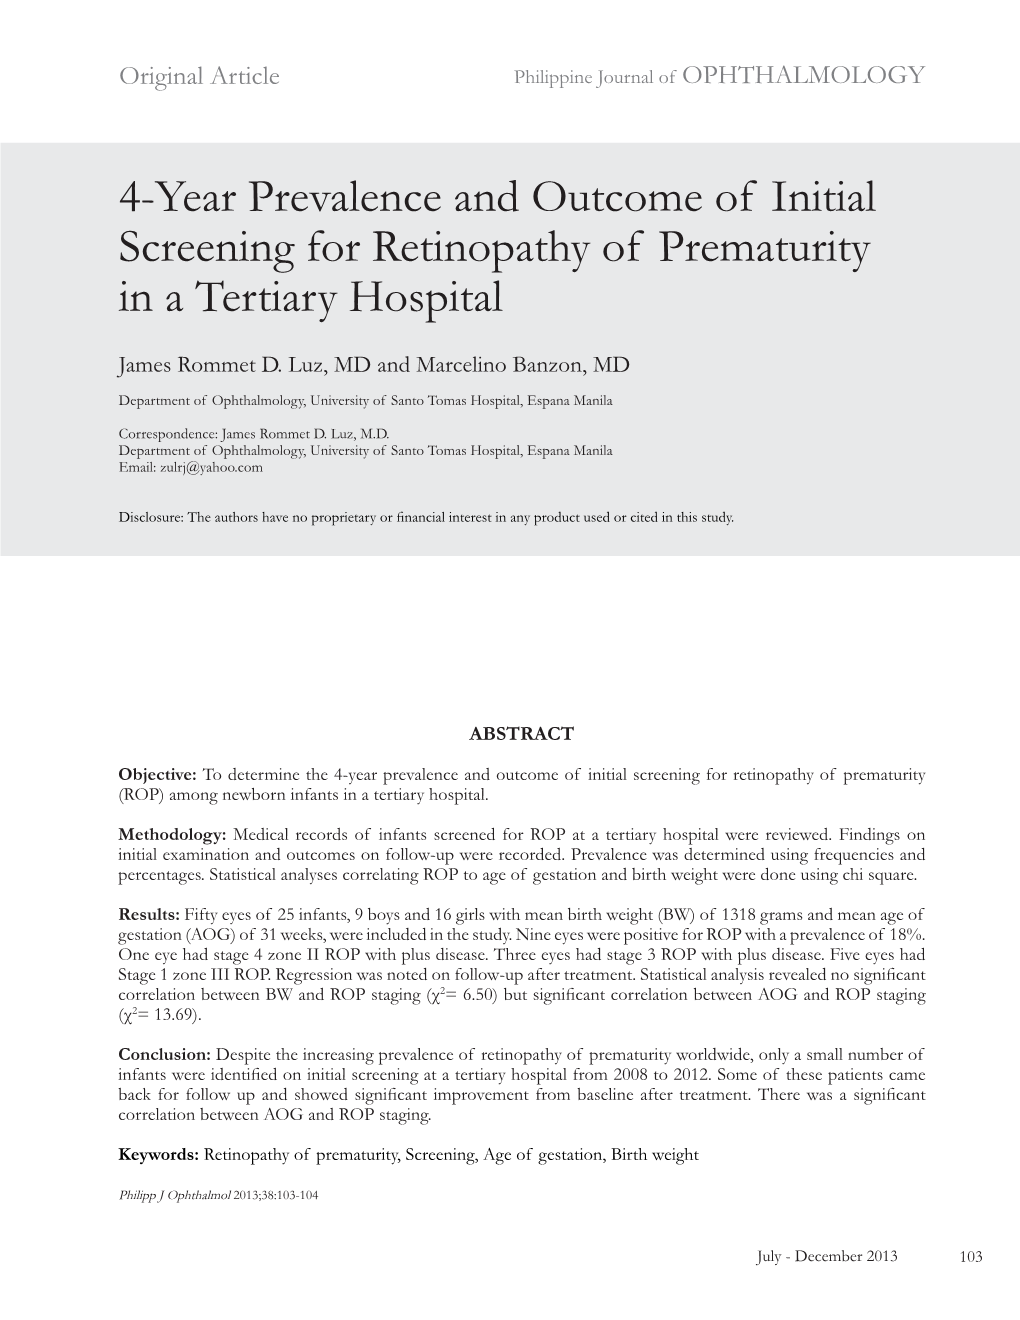 4-Year Prevalence and Outcome of Initial Screening for Retinopathy of Prematurity in a Tertiary Hospital